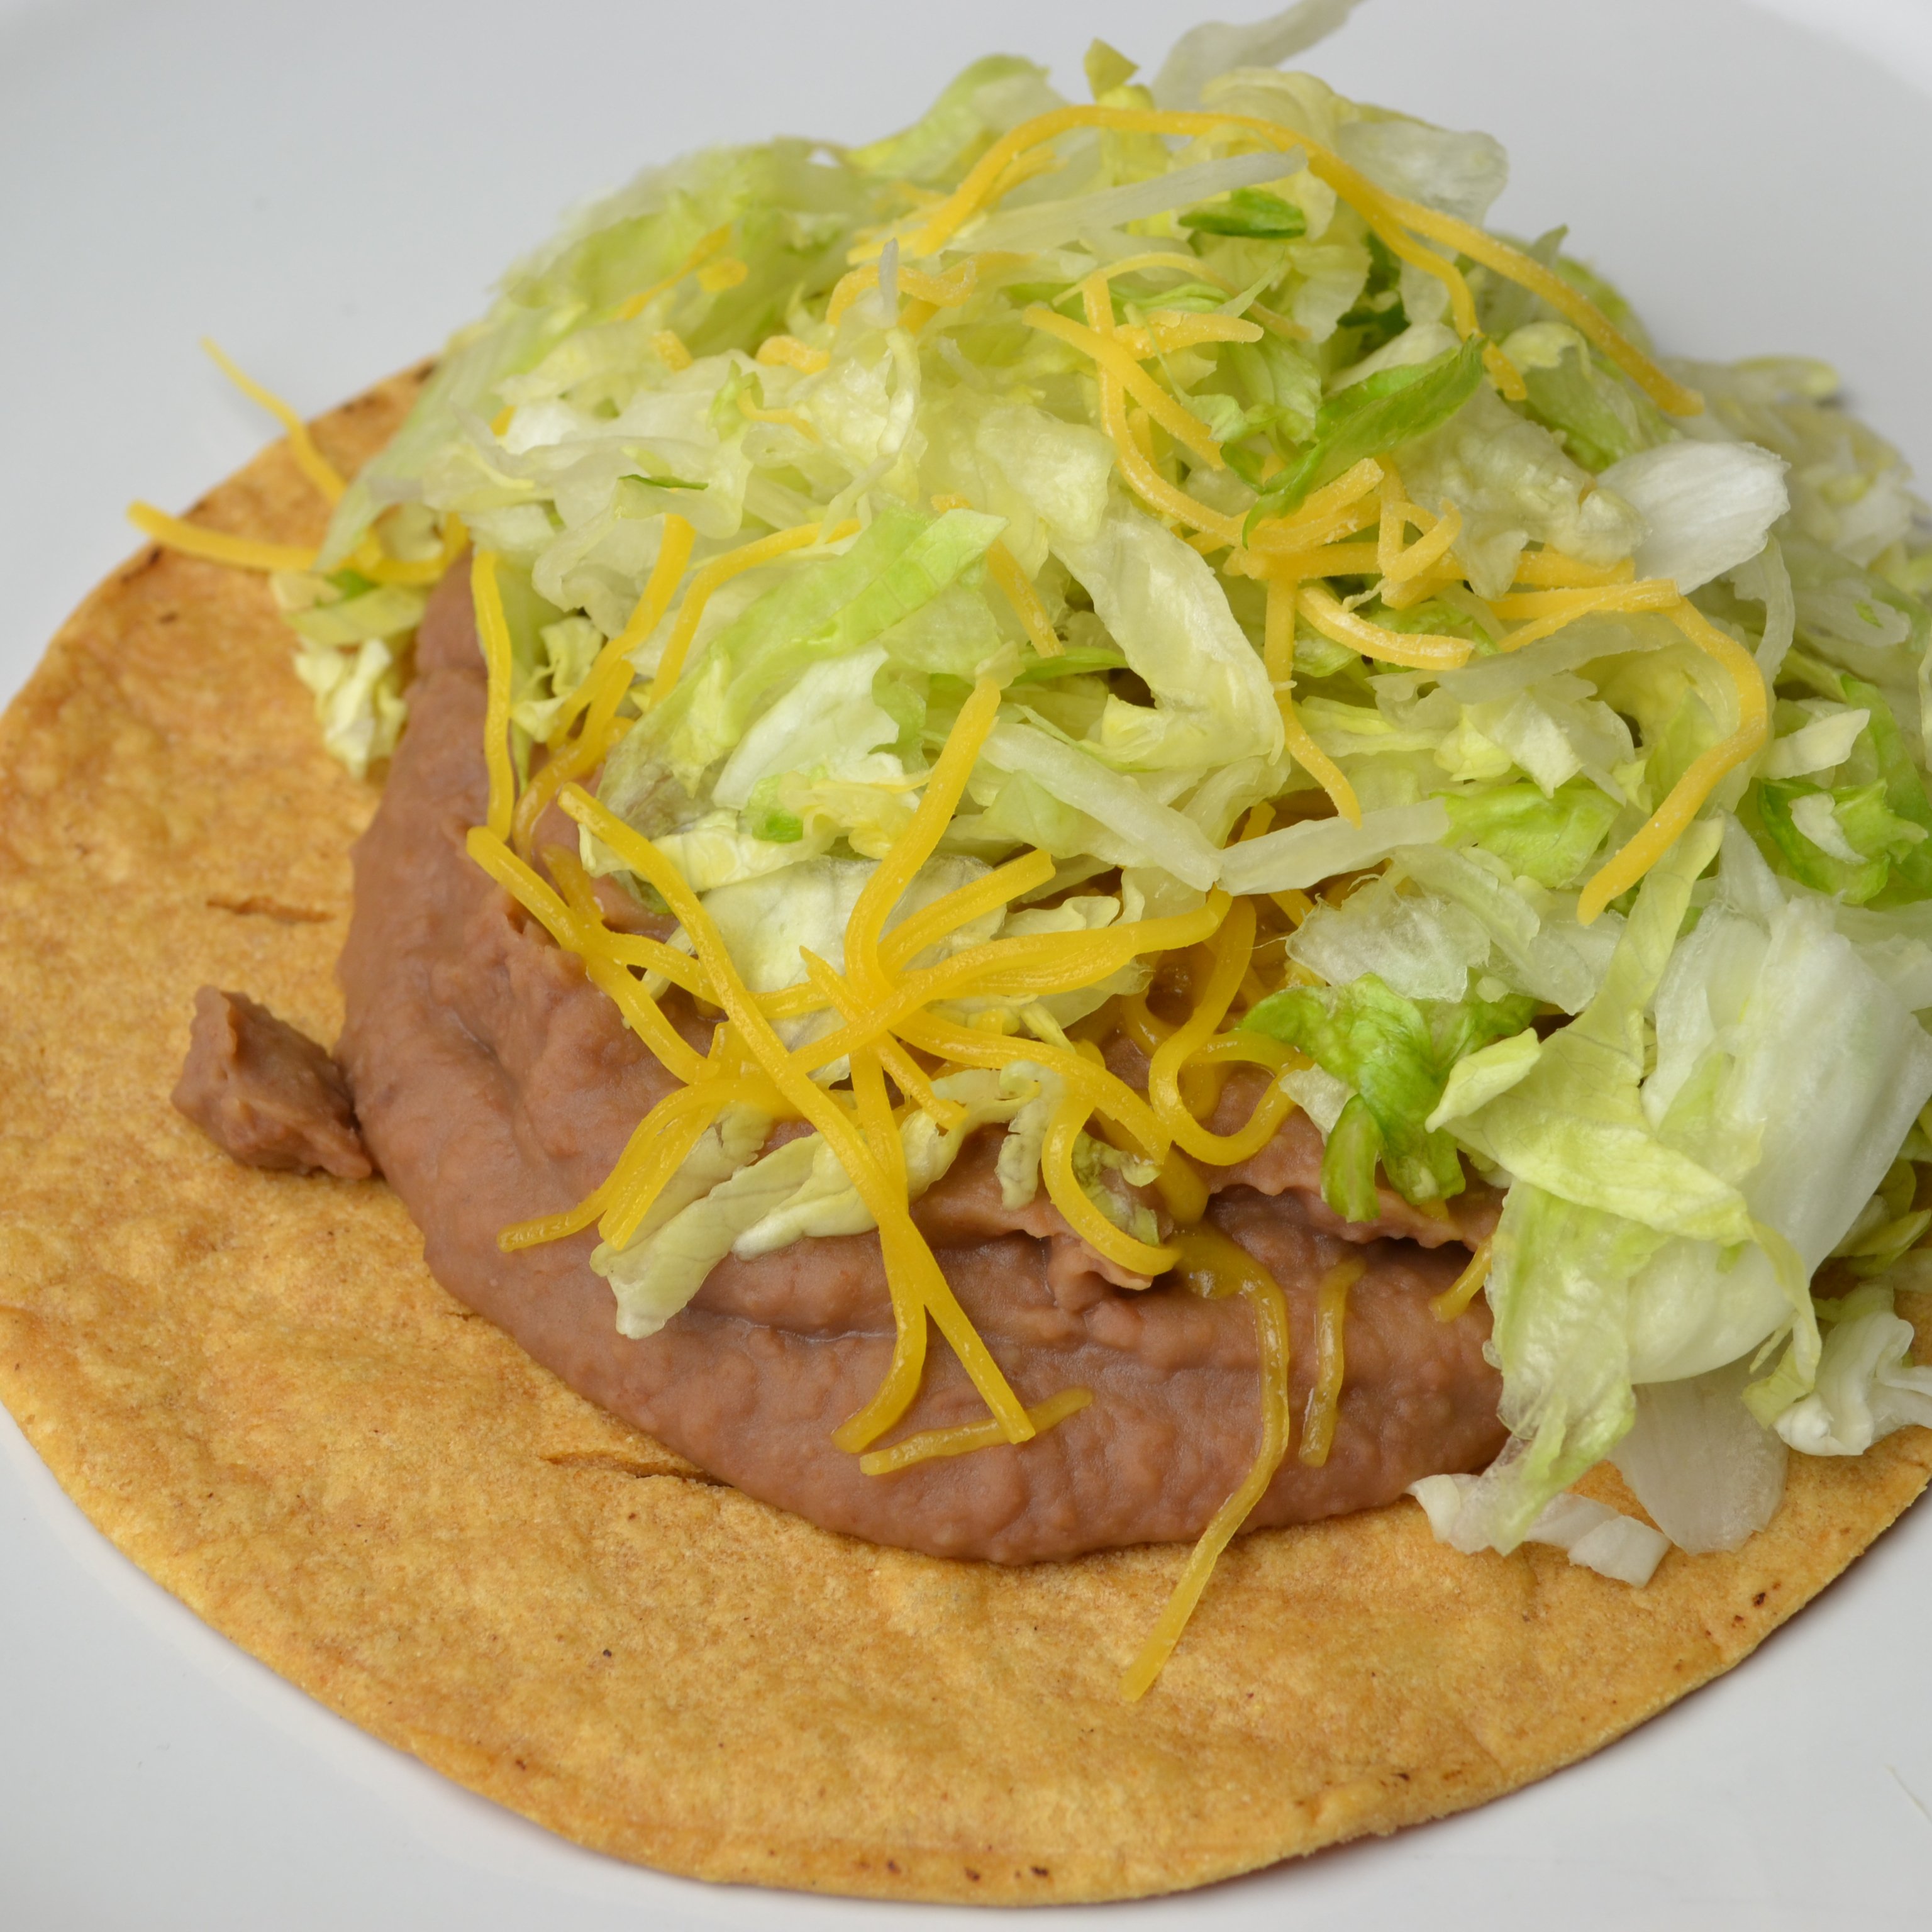 #4 Bean and Cheese Tostada